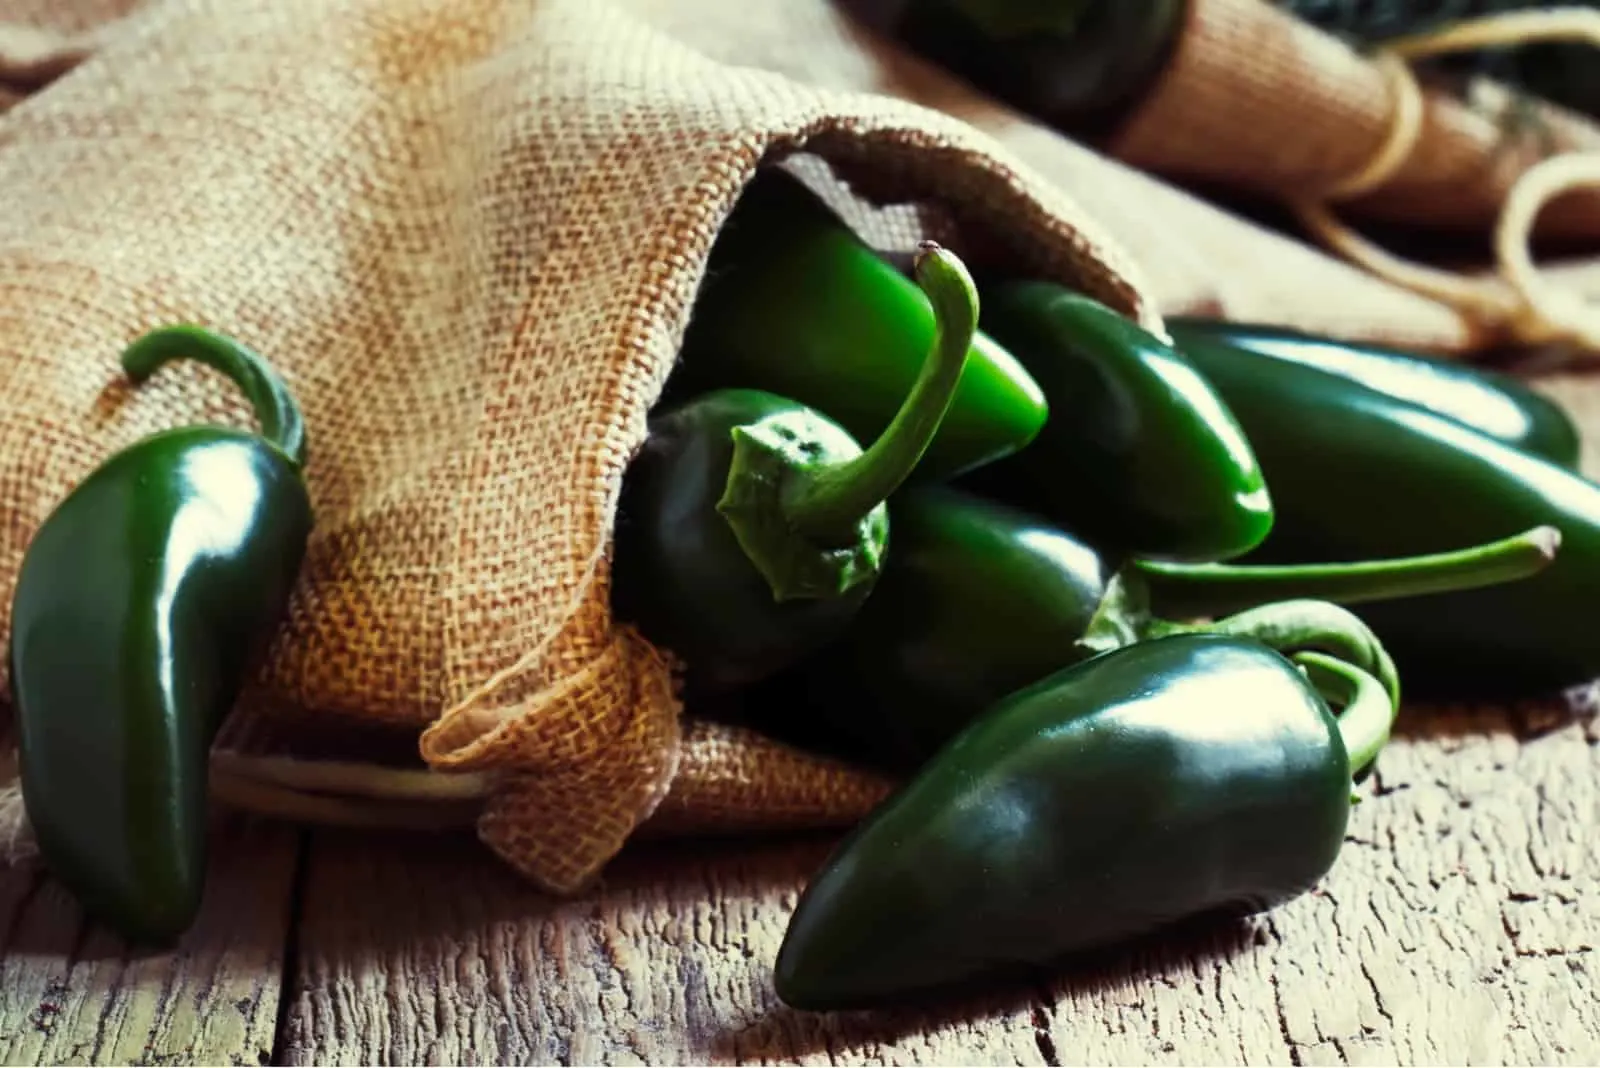 Green jalapeno peppers, old wooden kitchen table background